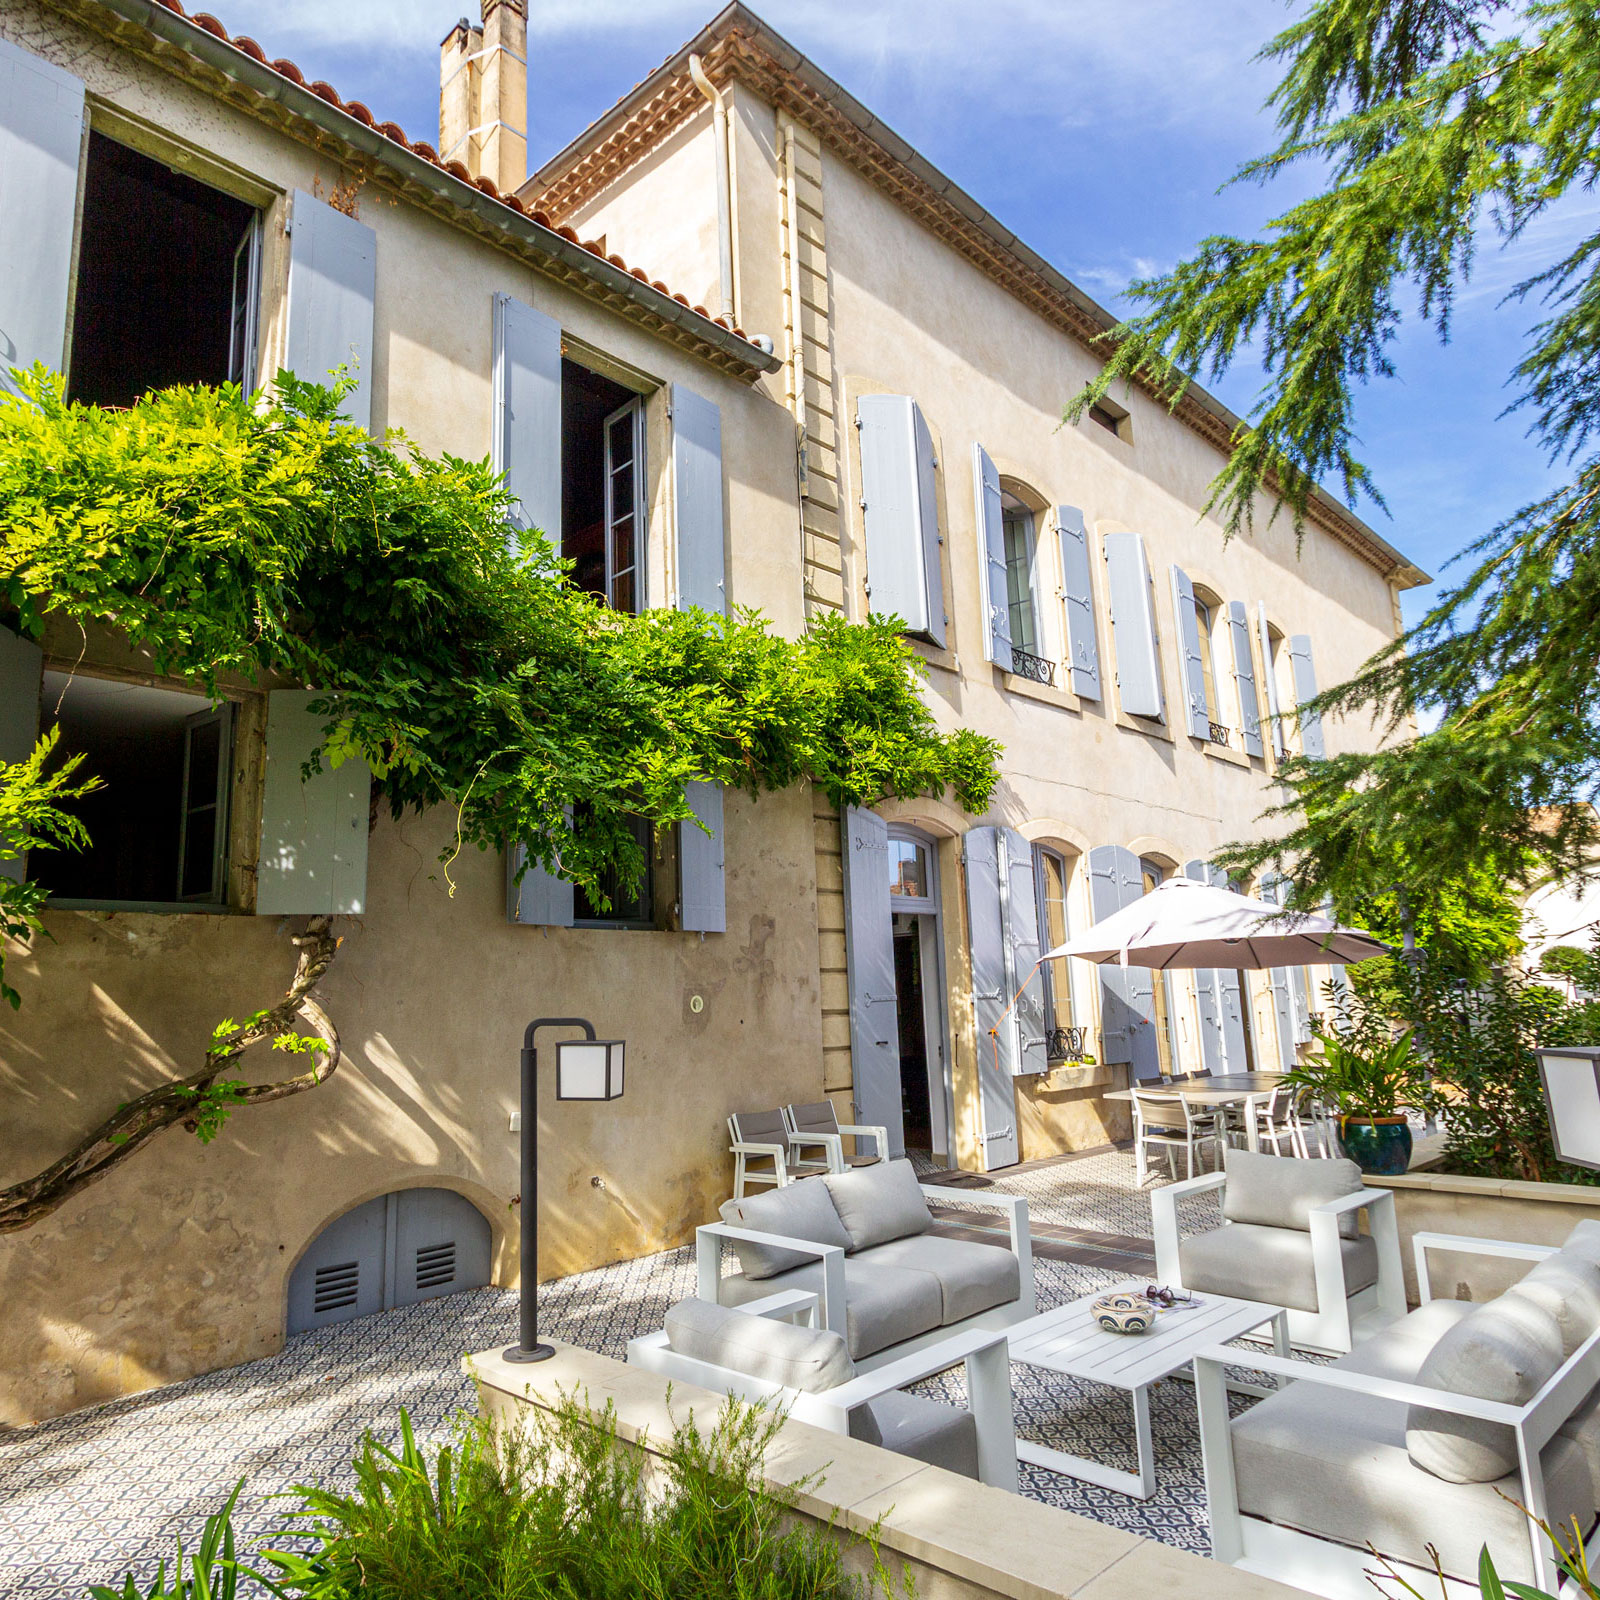 Villa Pin Napoleon, holiday villa with a private heated gated pool, walk to restaurants in Monsegur SW France